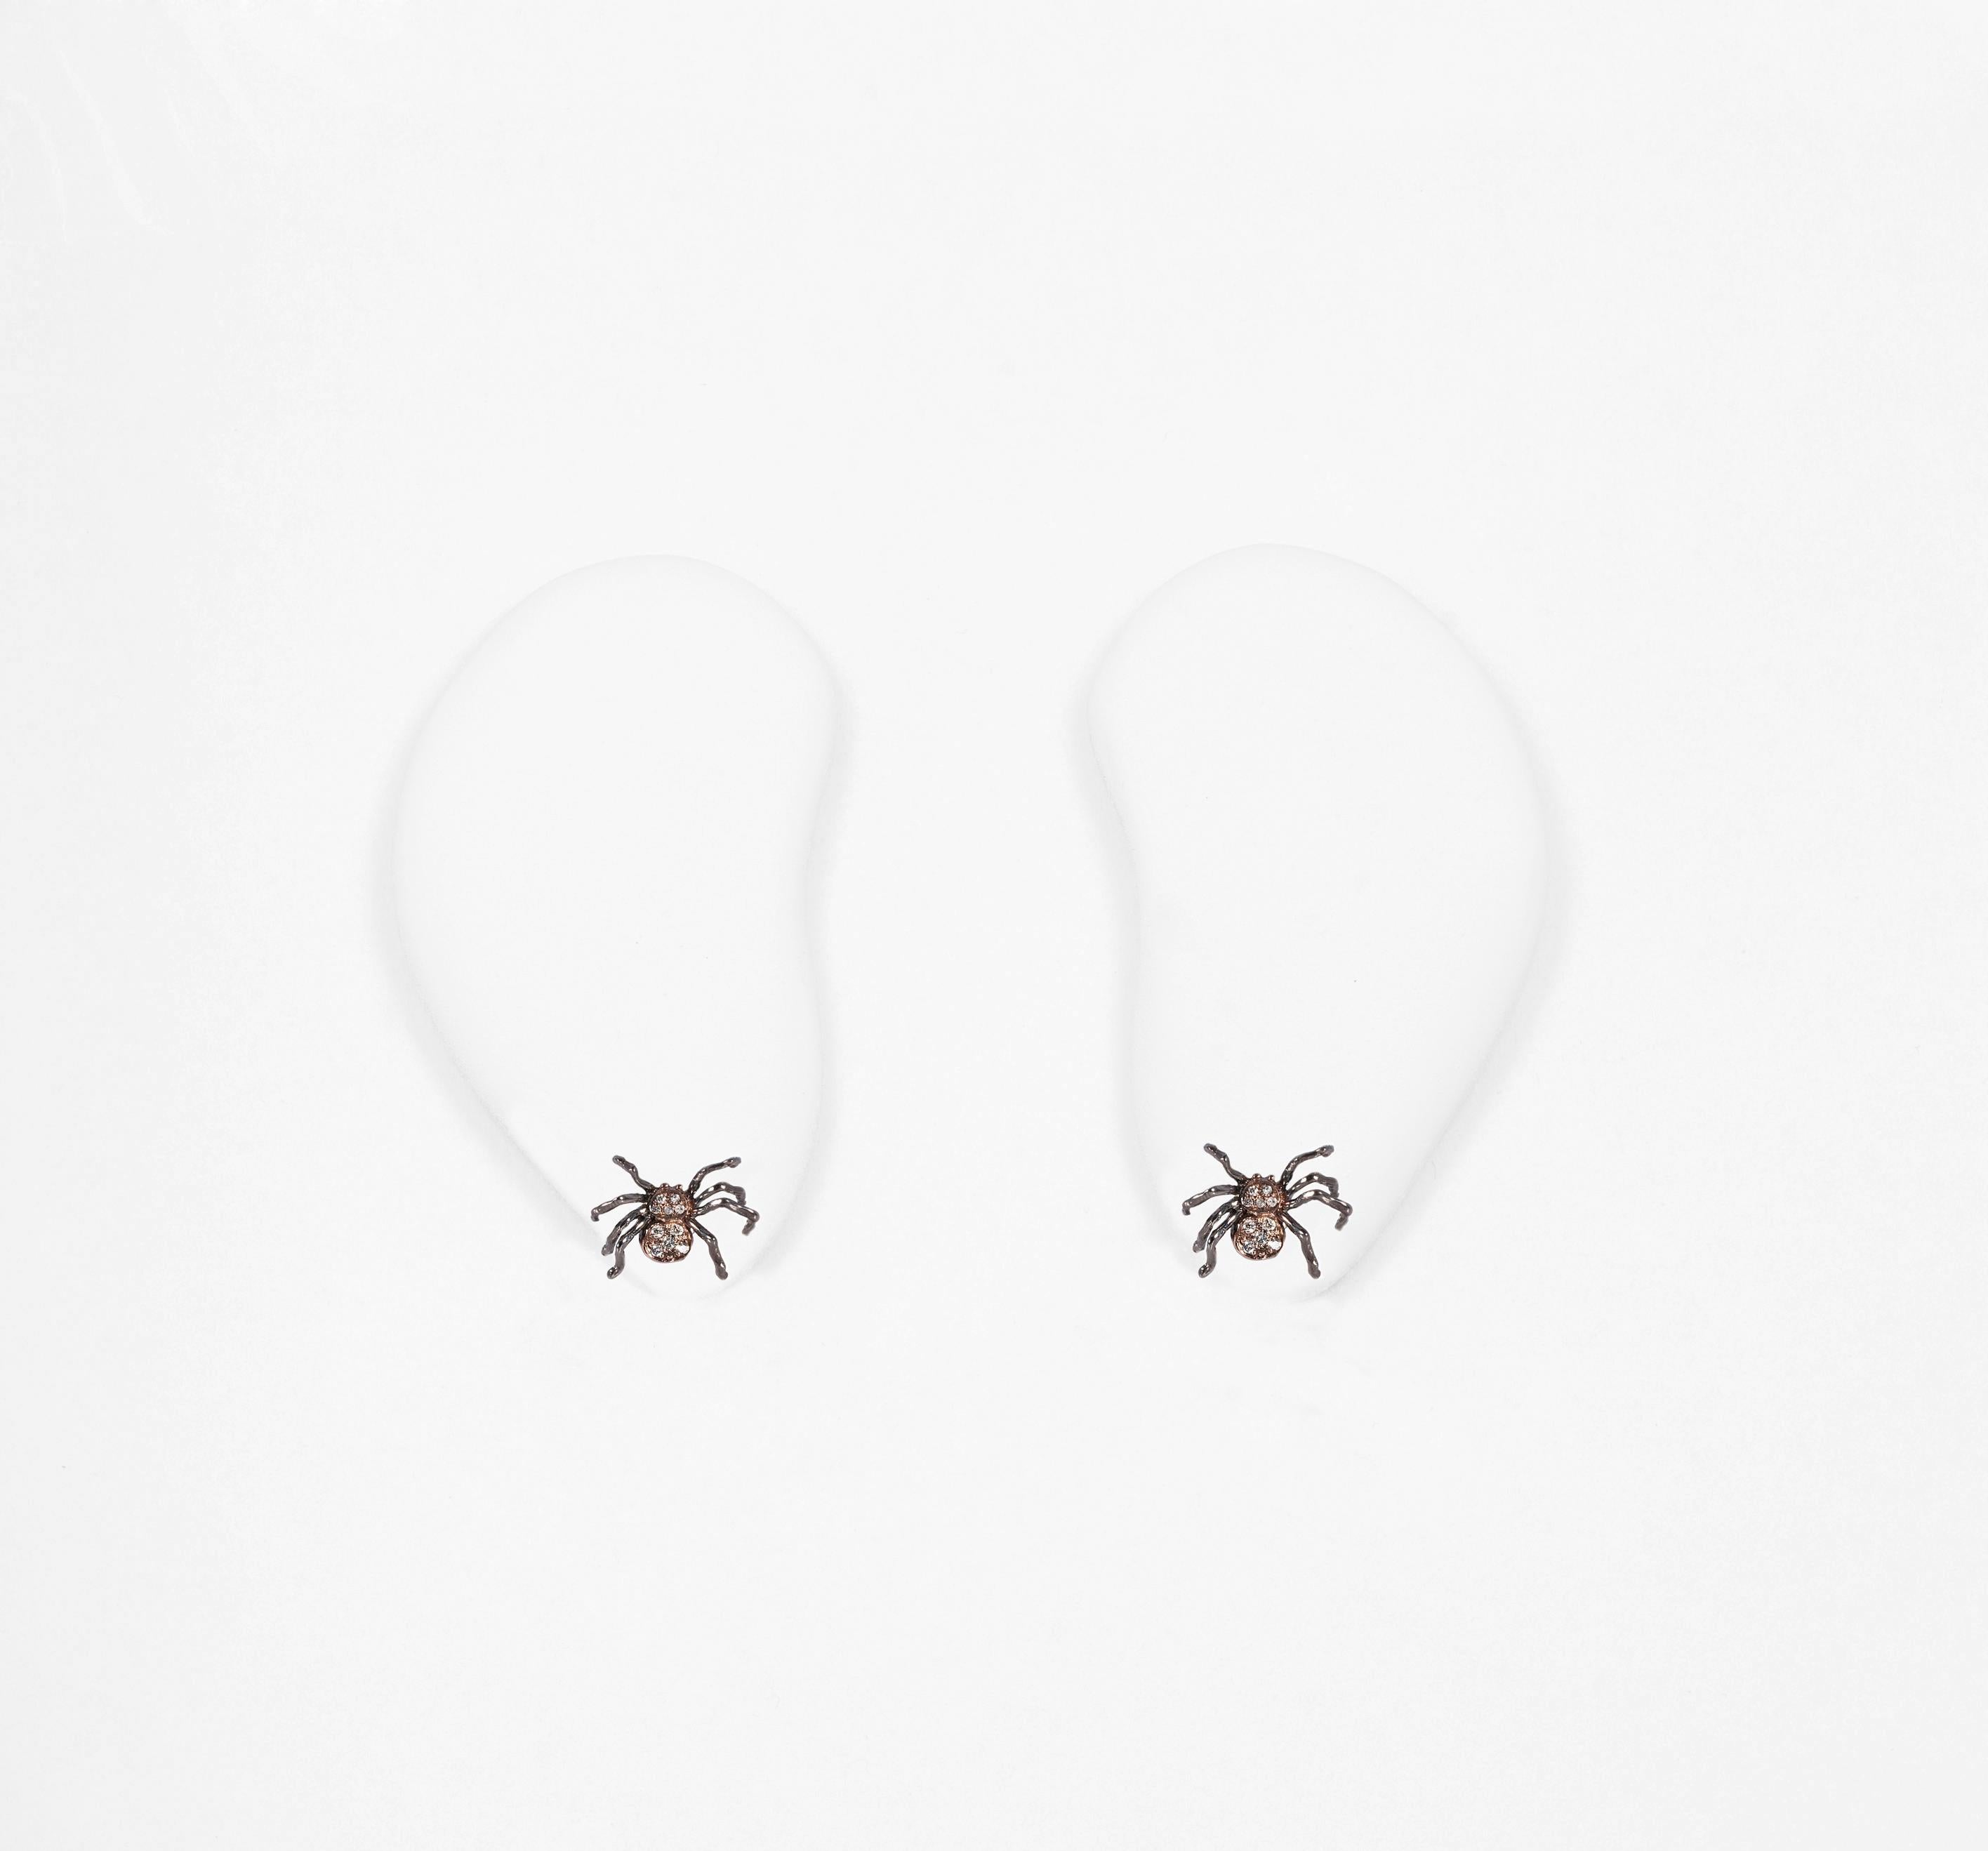 Contemporary Gold Spider Earrings with Pavé Grey Diamonds